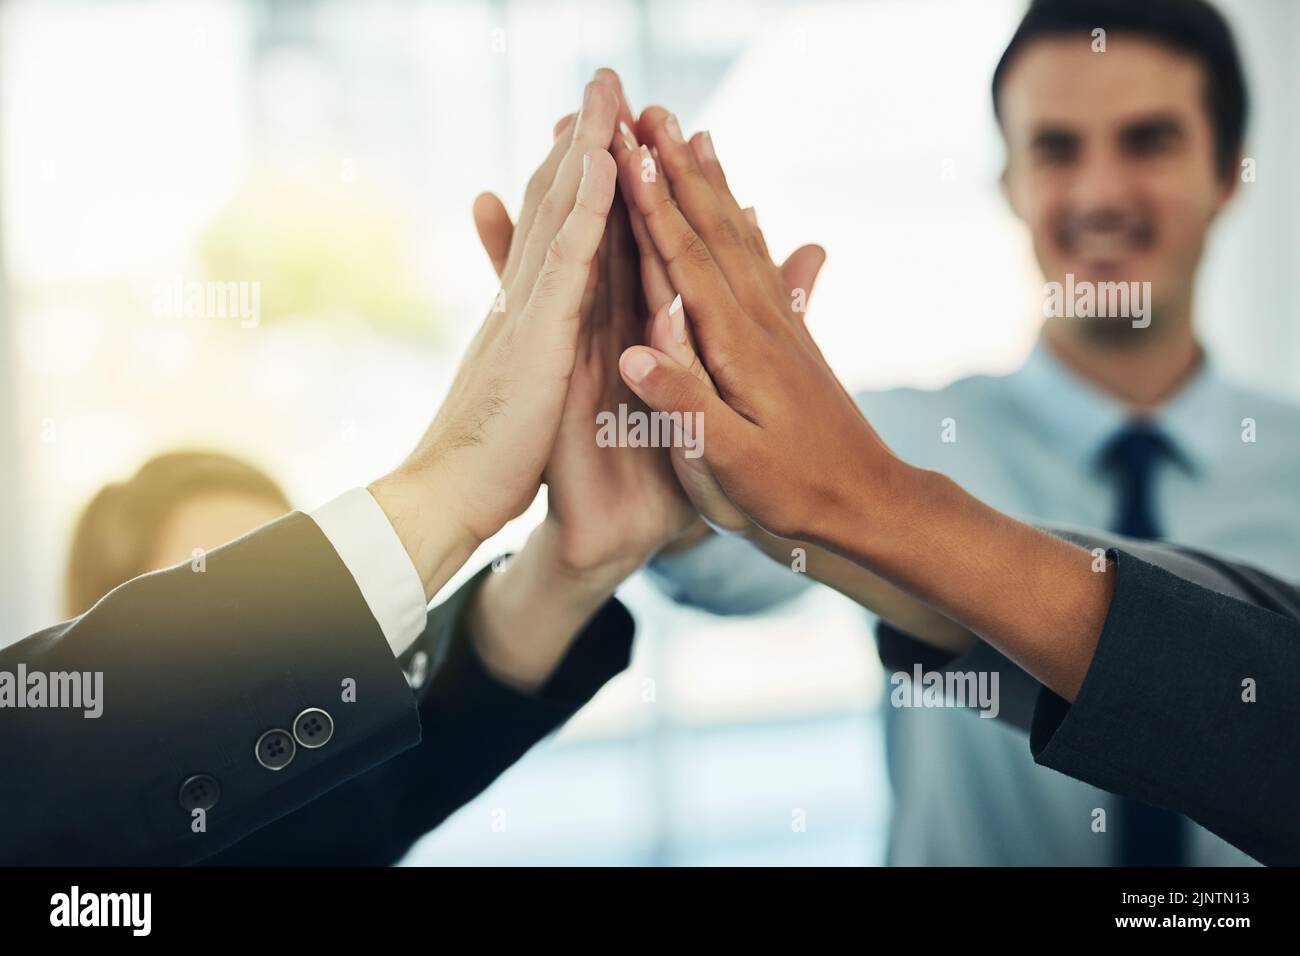 The best work is teamwork. a group of businesspeople joining their hands in solidarity. Stock Photo